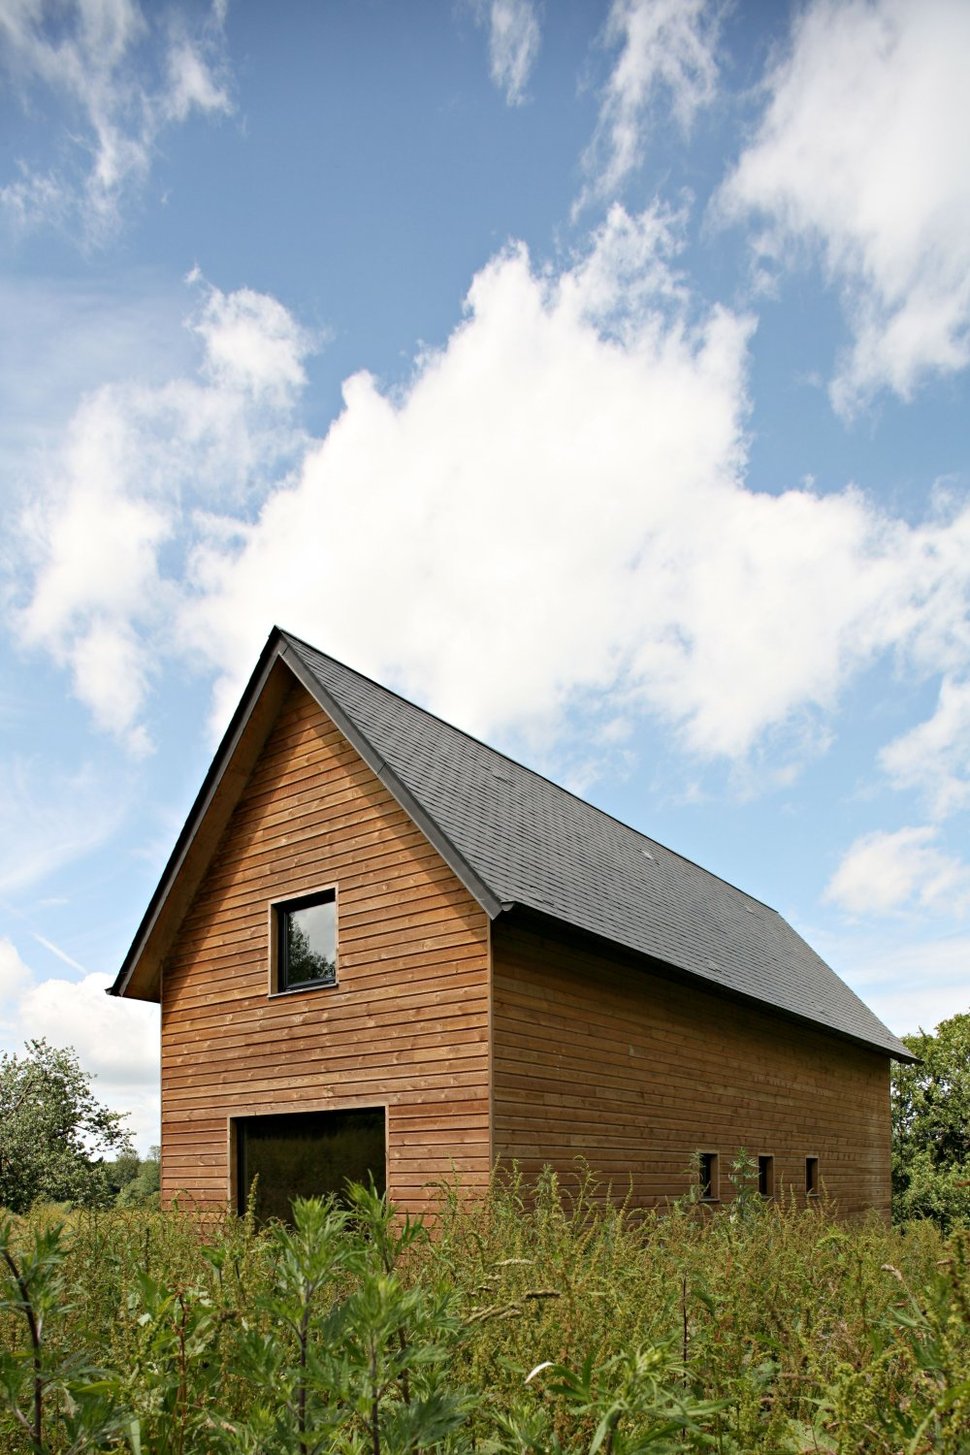 barn-style-weekend-cabin-embraces-simple-life-4a-exterior.jpg